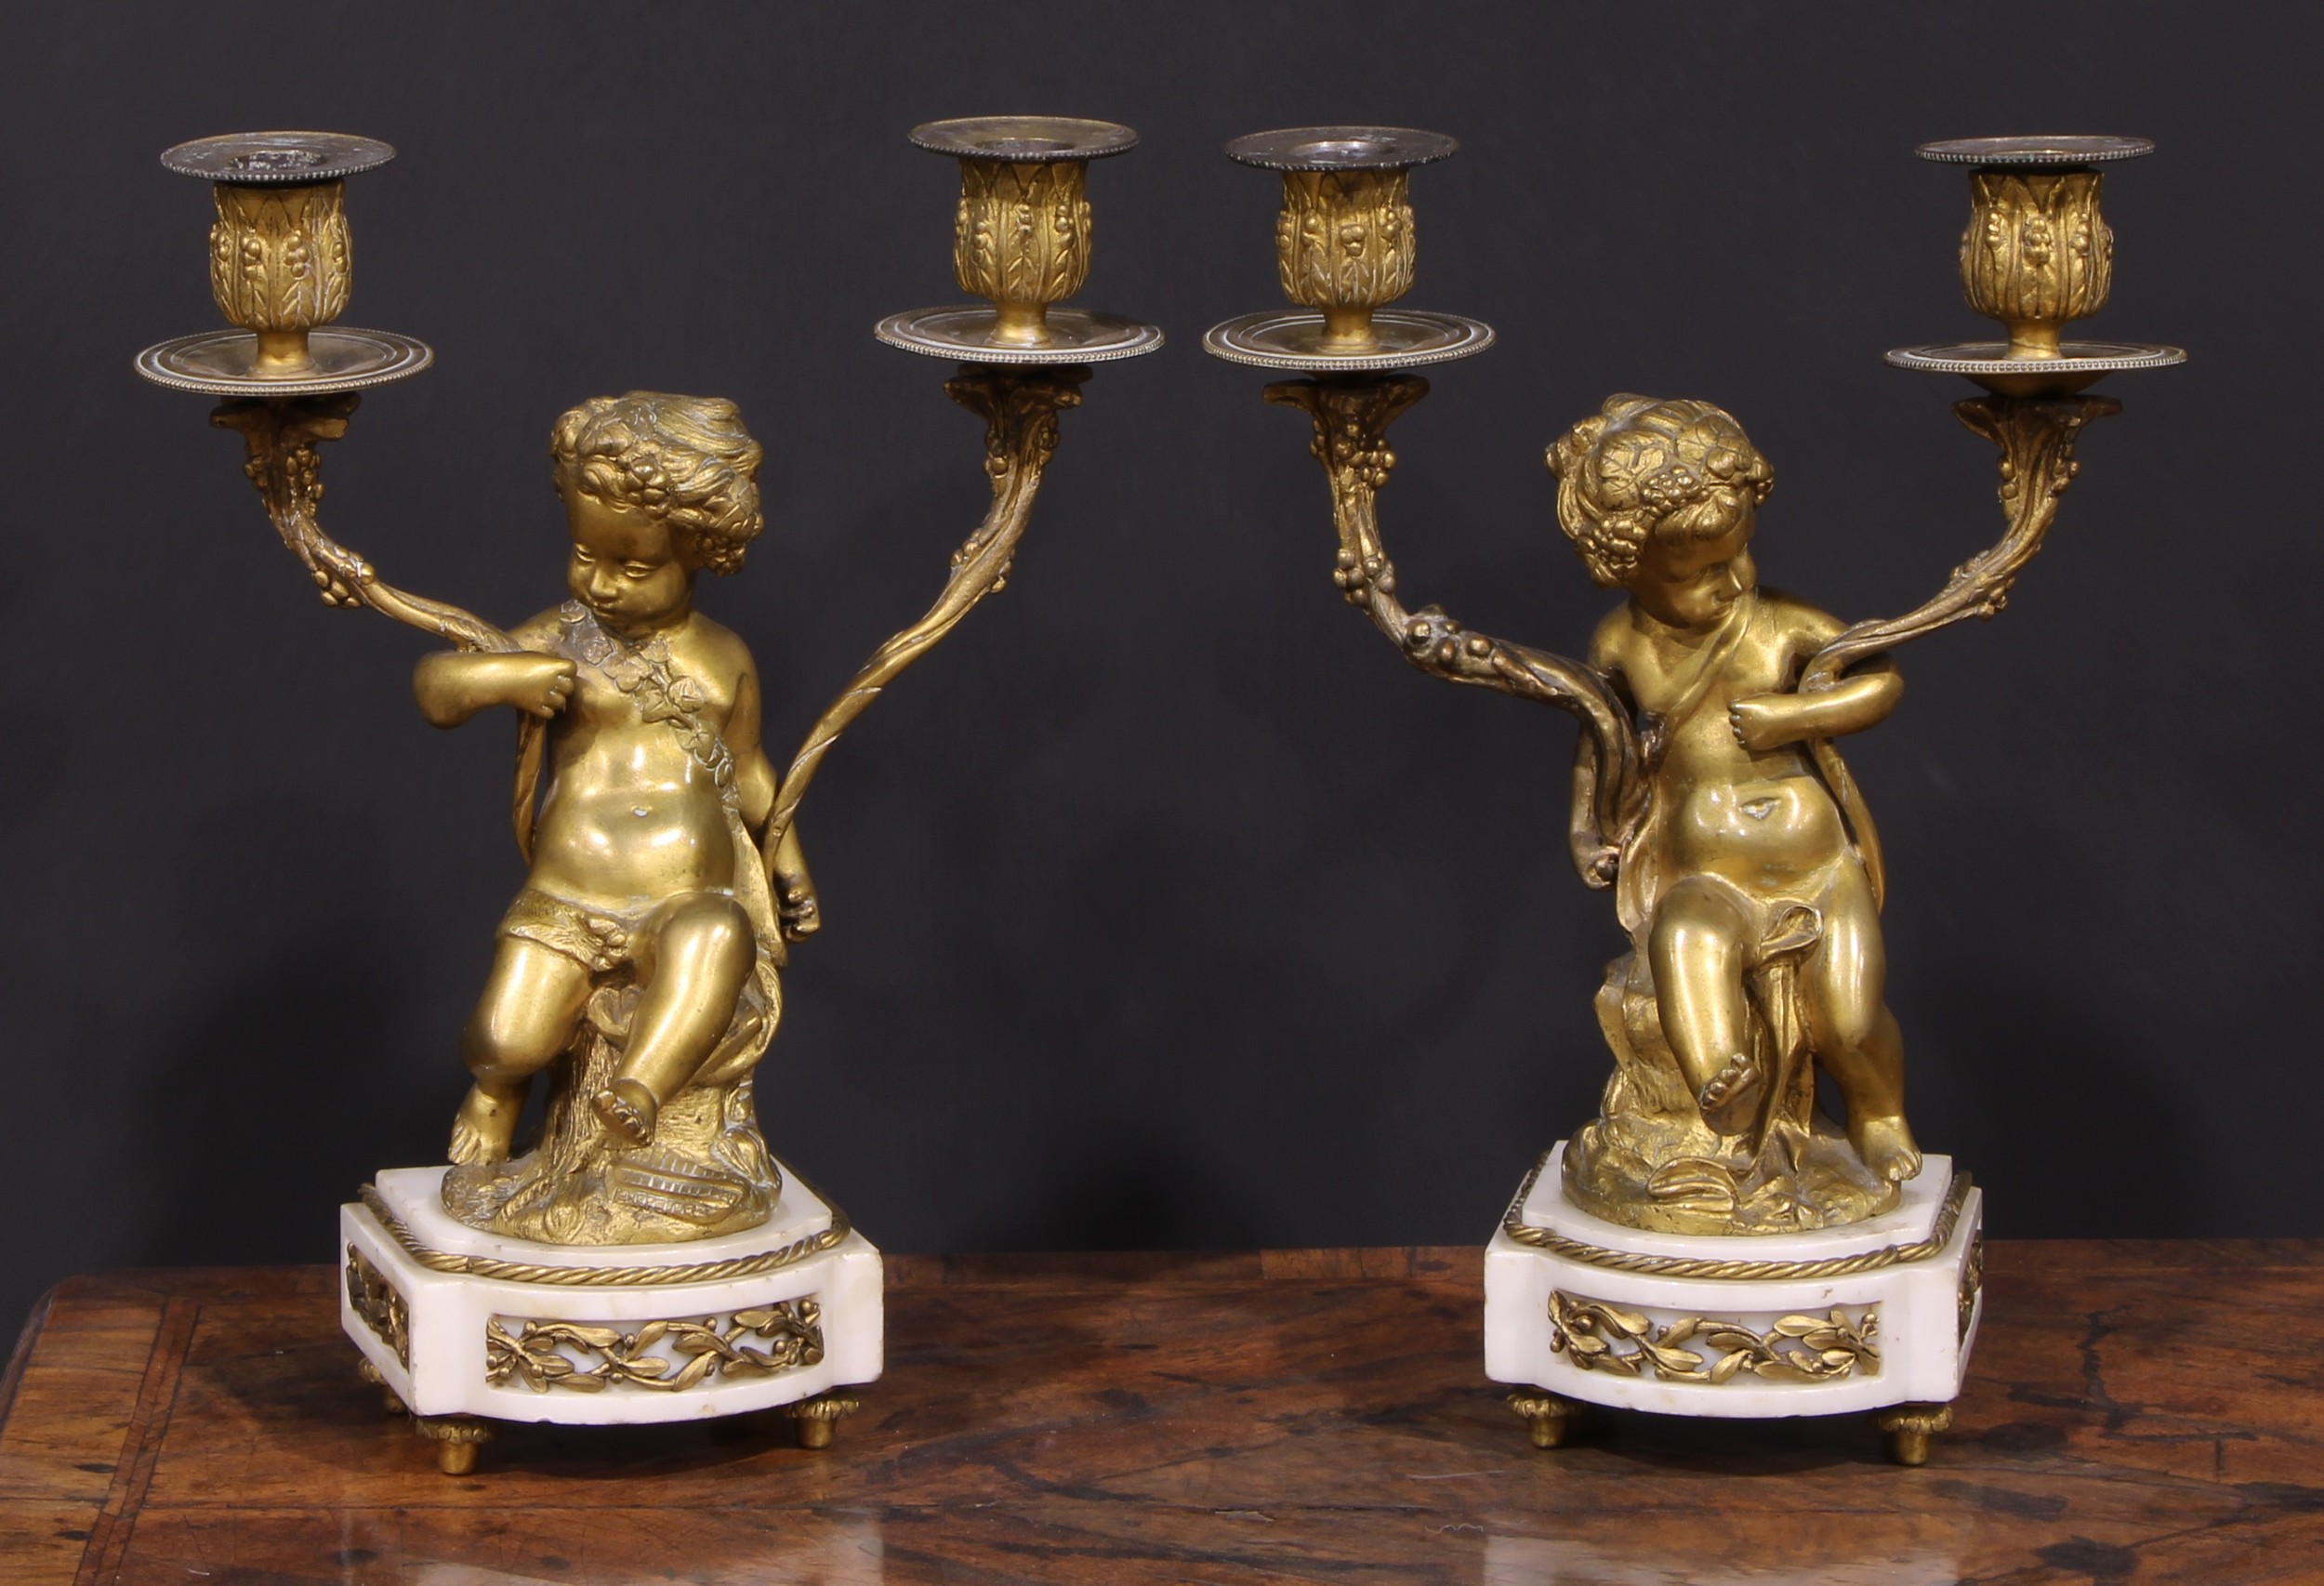 A pair of 19th century French bronze figural two-light candelabra, after Clodion (1738 - 1814),